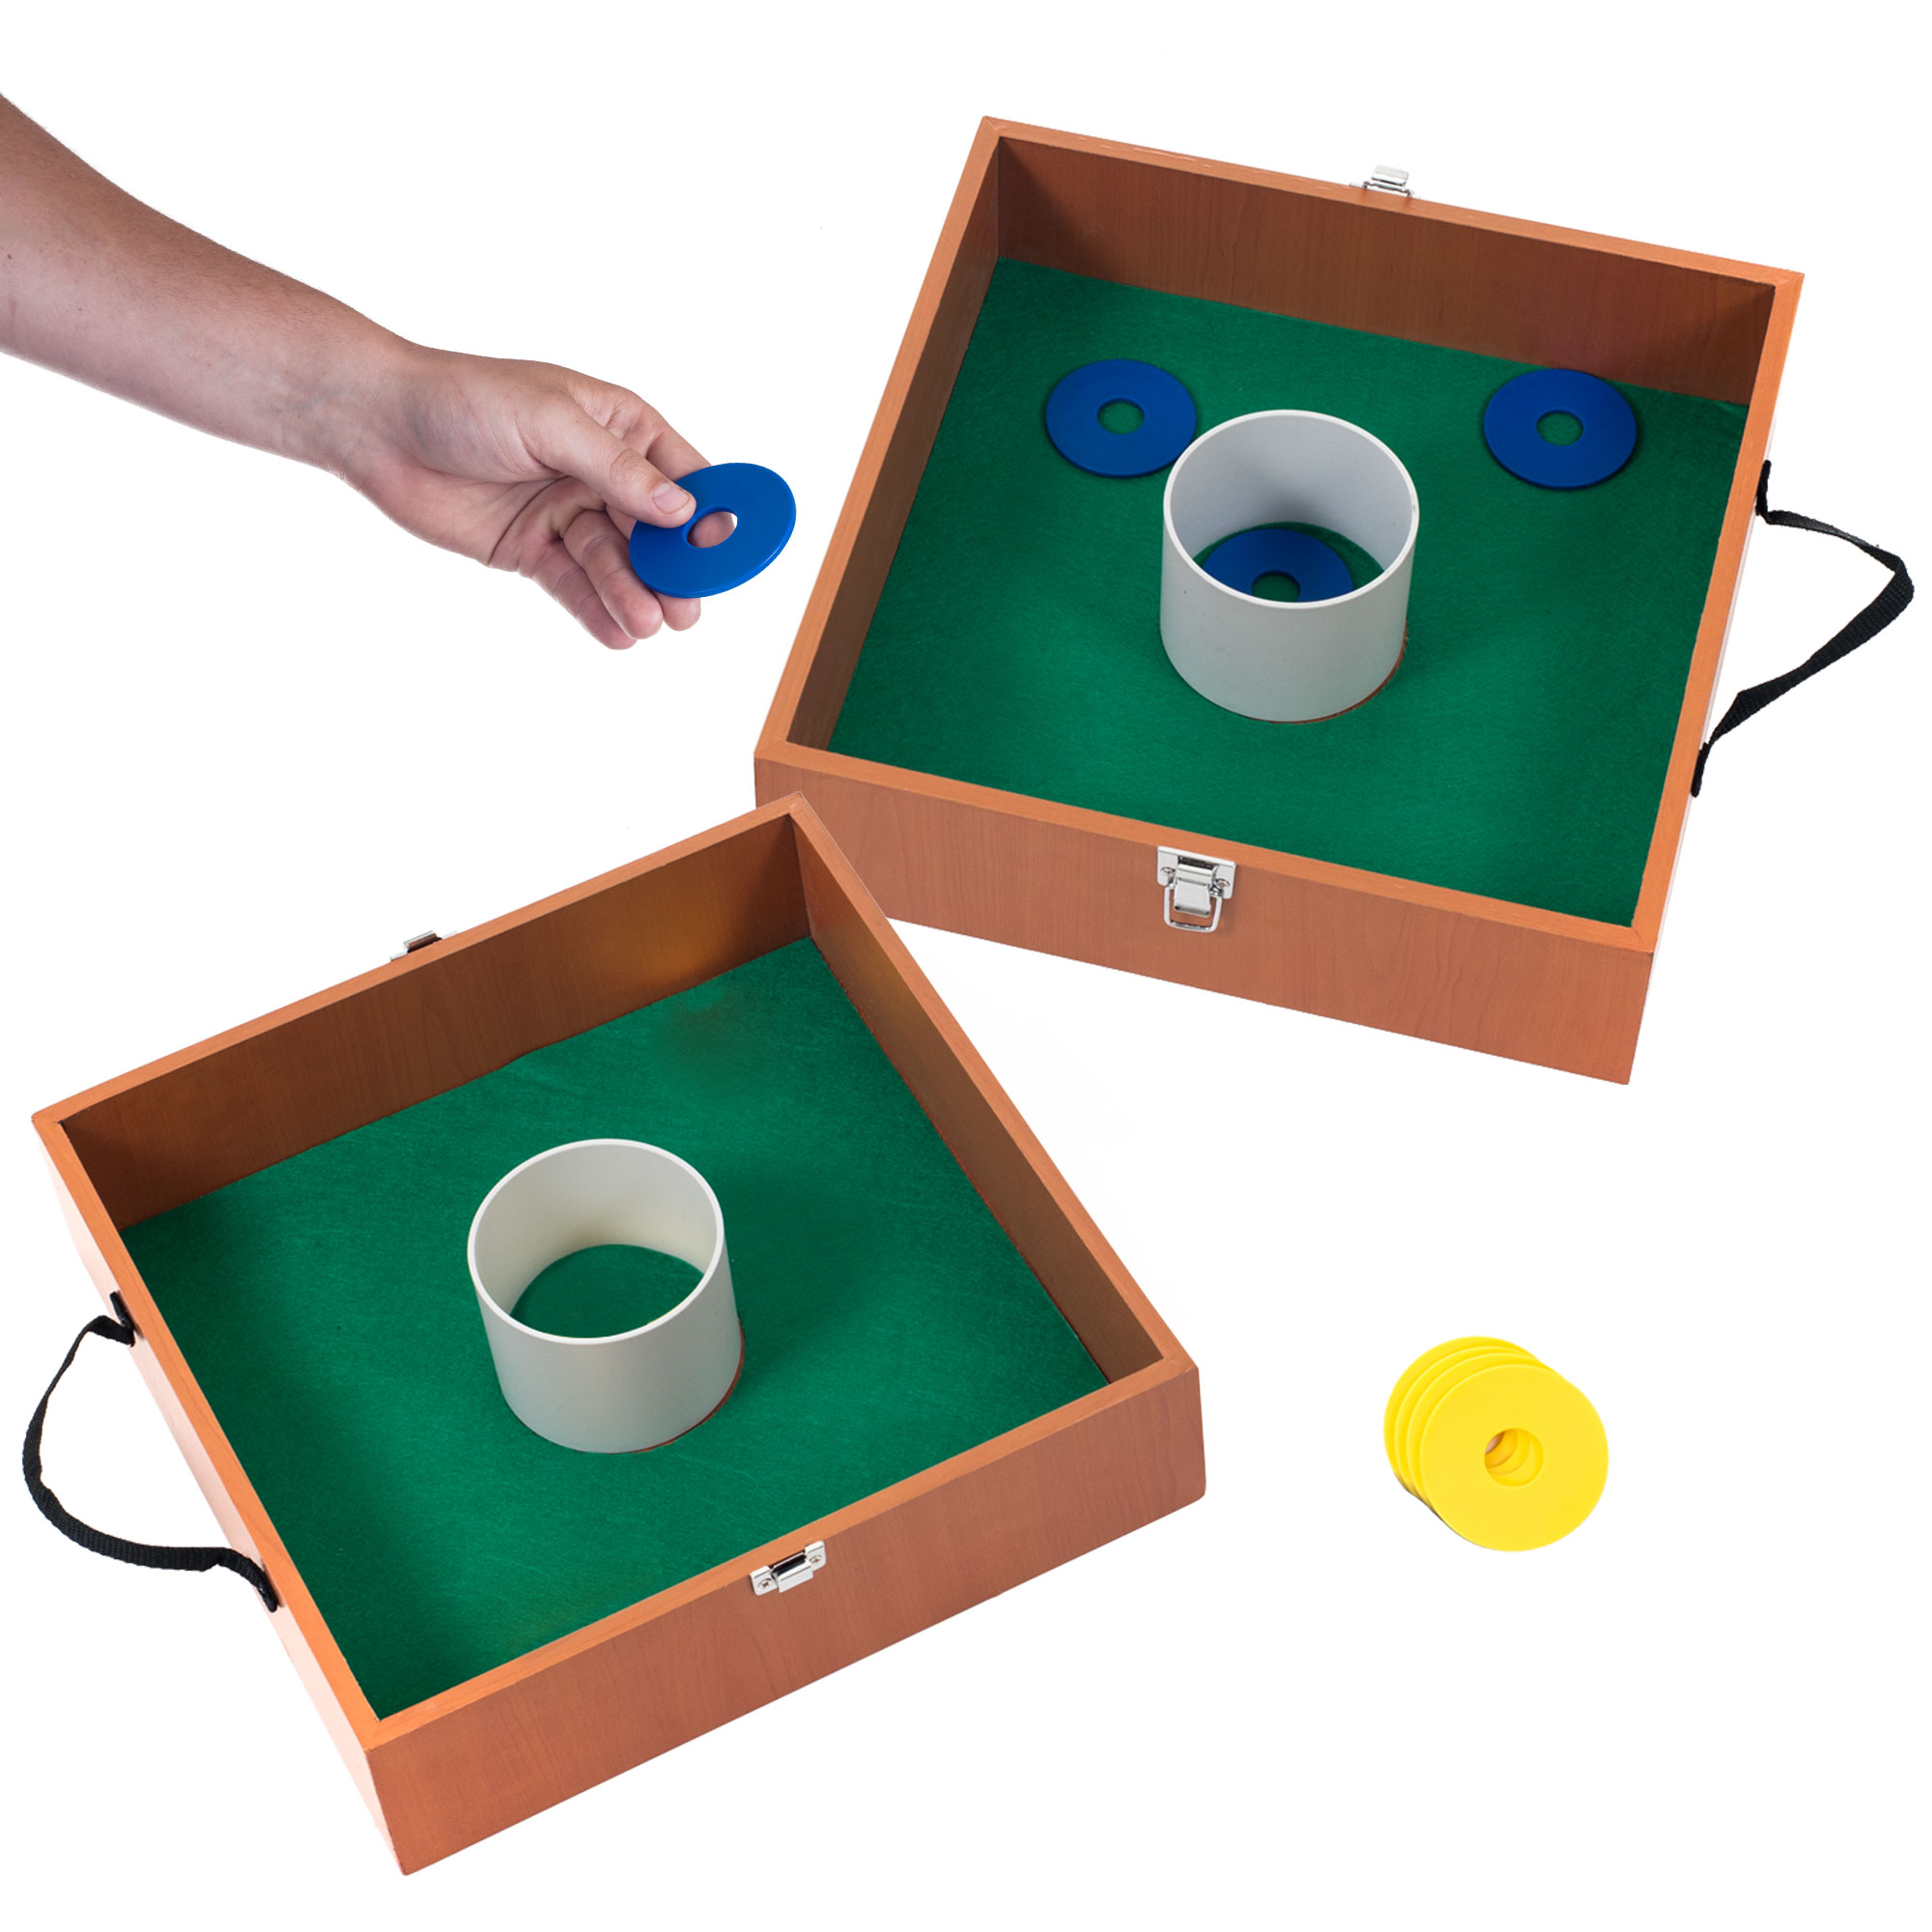 Washer Toss Game by Trademark Games - Easy to Carry